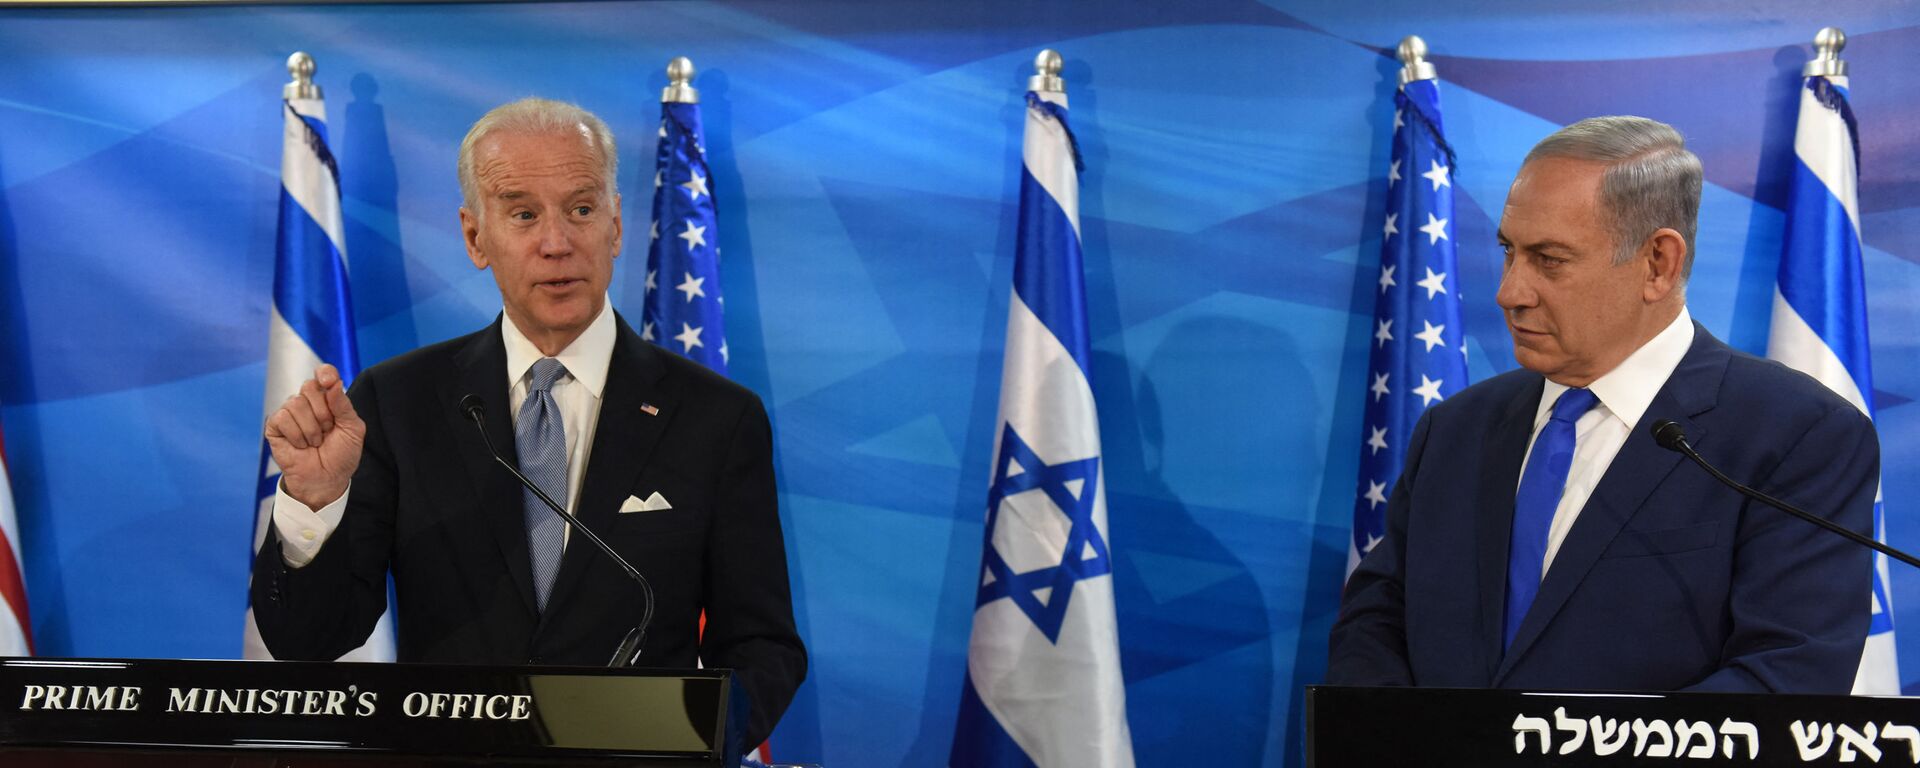 US Vice President Joe Biden (L) and Israeli Prime Minister Benjamin Netanyahu give joint statements to press in the prime minister's office in Jerusalem on March 9, 2016. - Biden implicitly criticised Palestinian leaders for not condemning attacks against Israelis, as an upsurge in violence marred his visit.  - Sputnik International, 1920, 18.05.2021